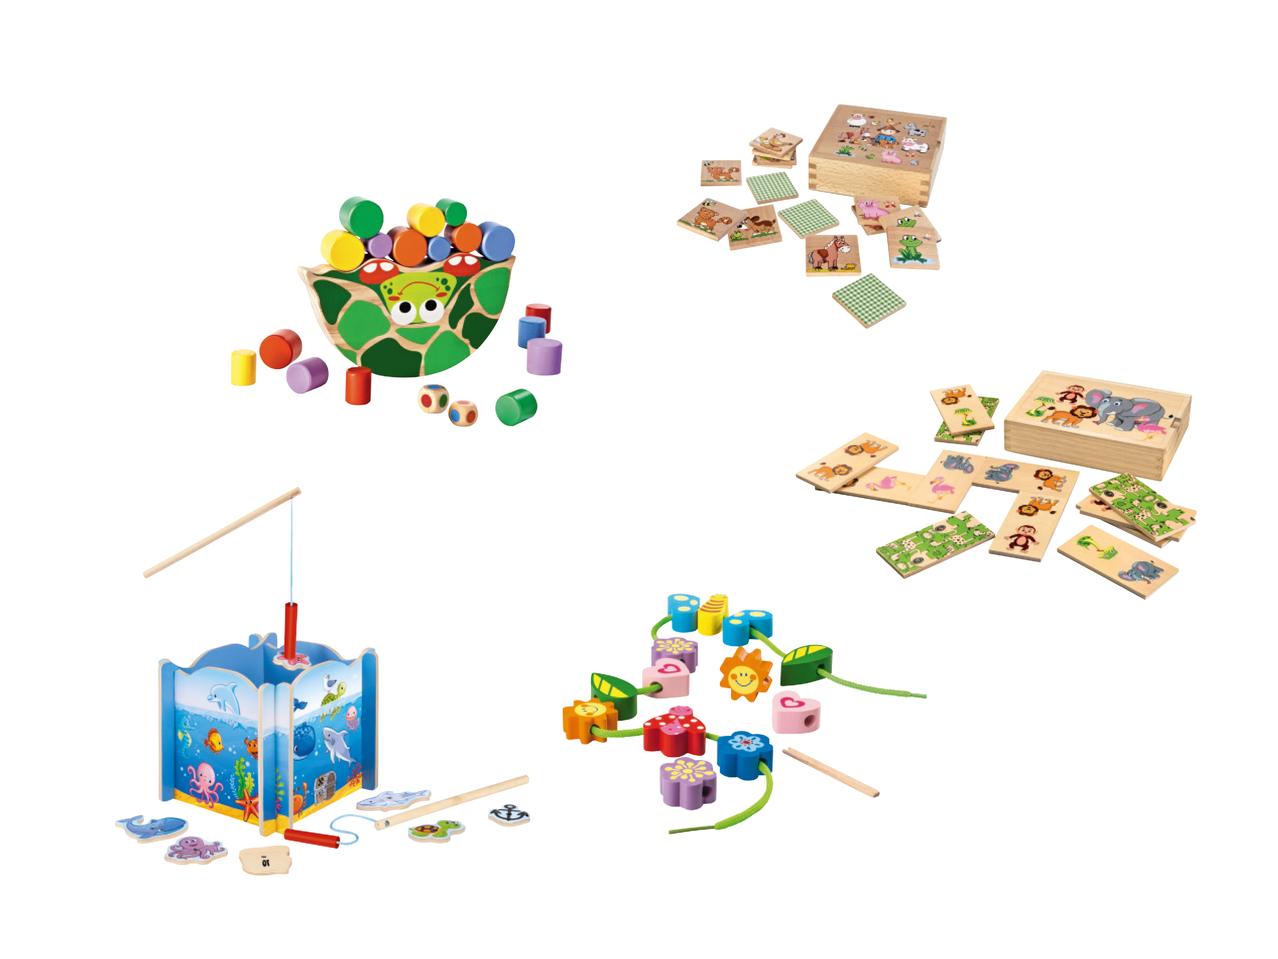 PLAYTIVE JUNIOR Wooden Games and Toys